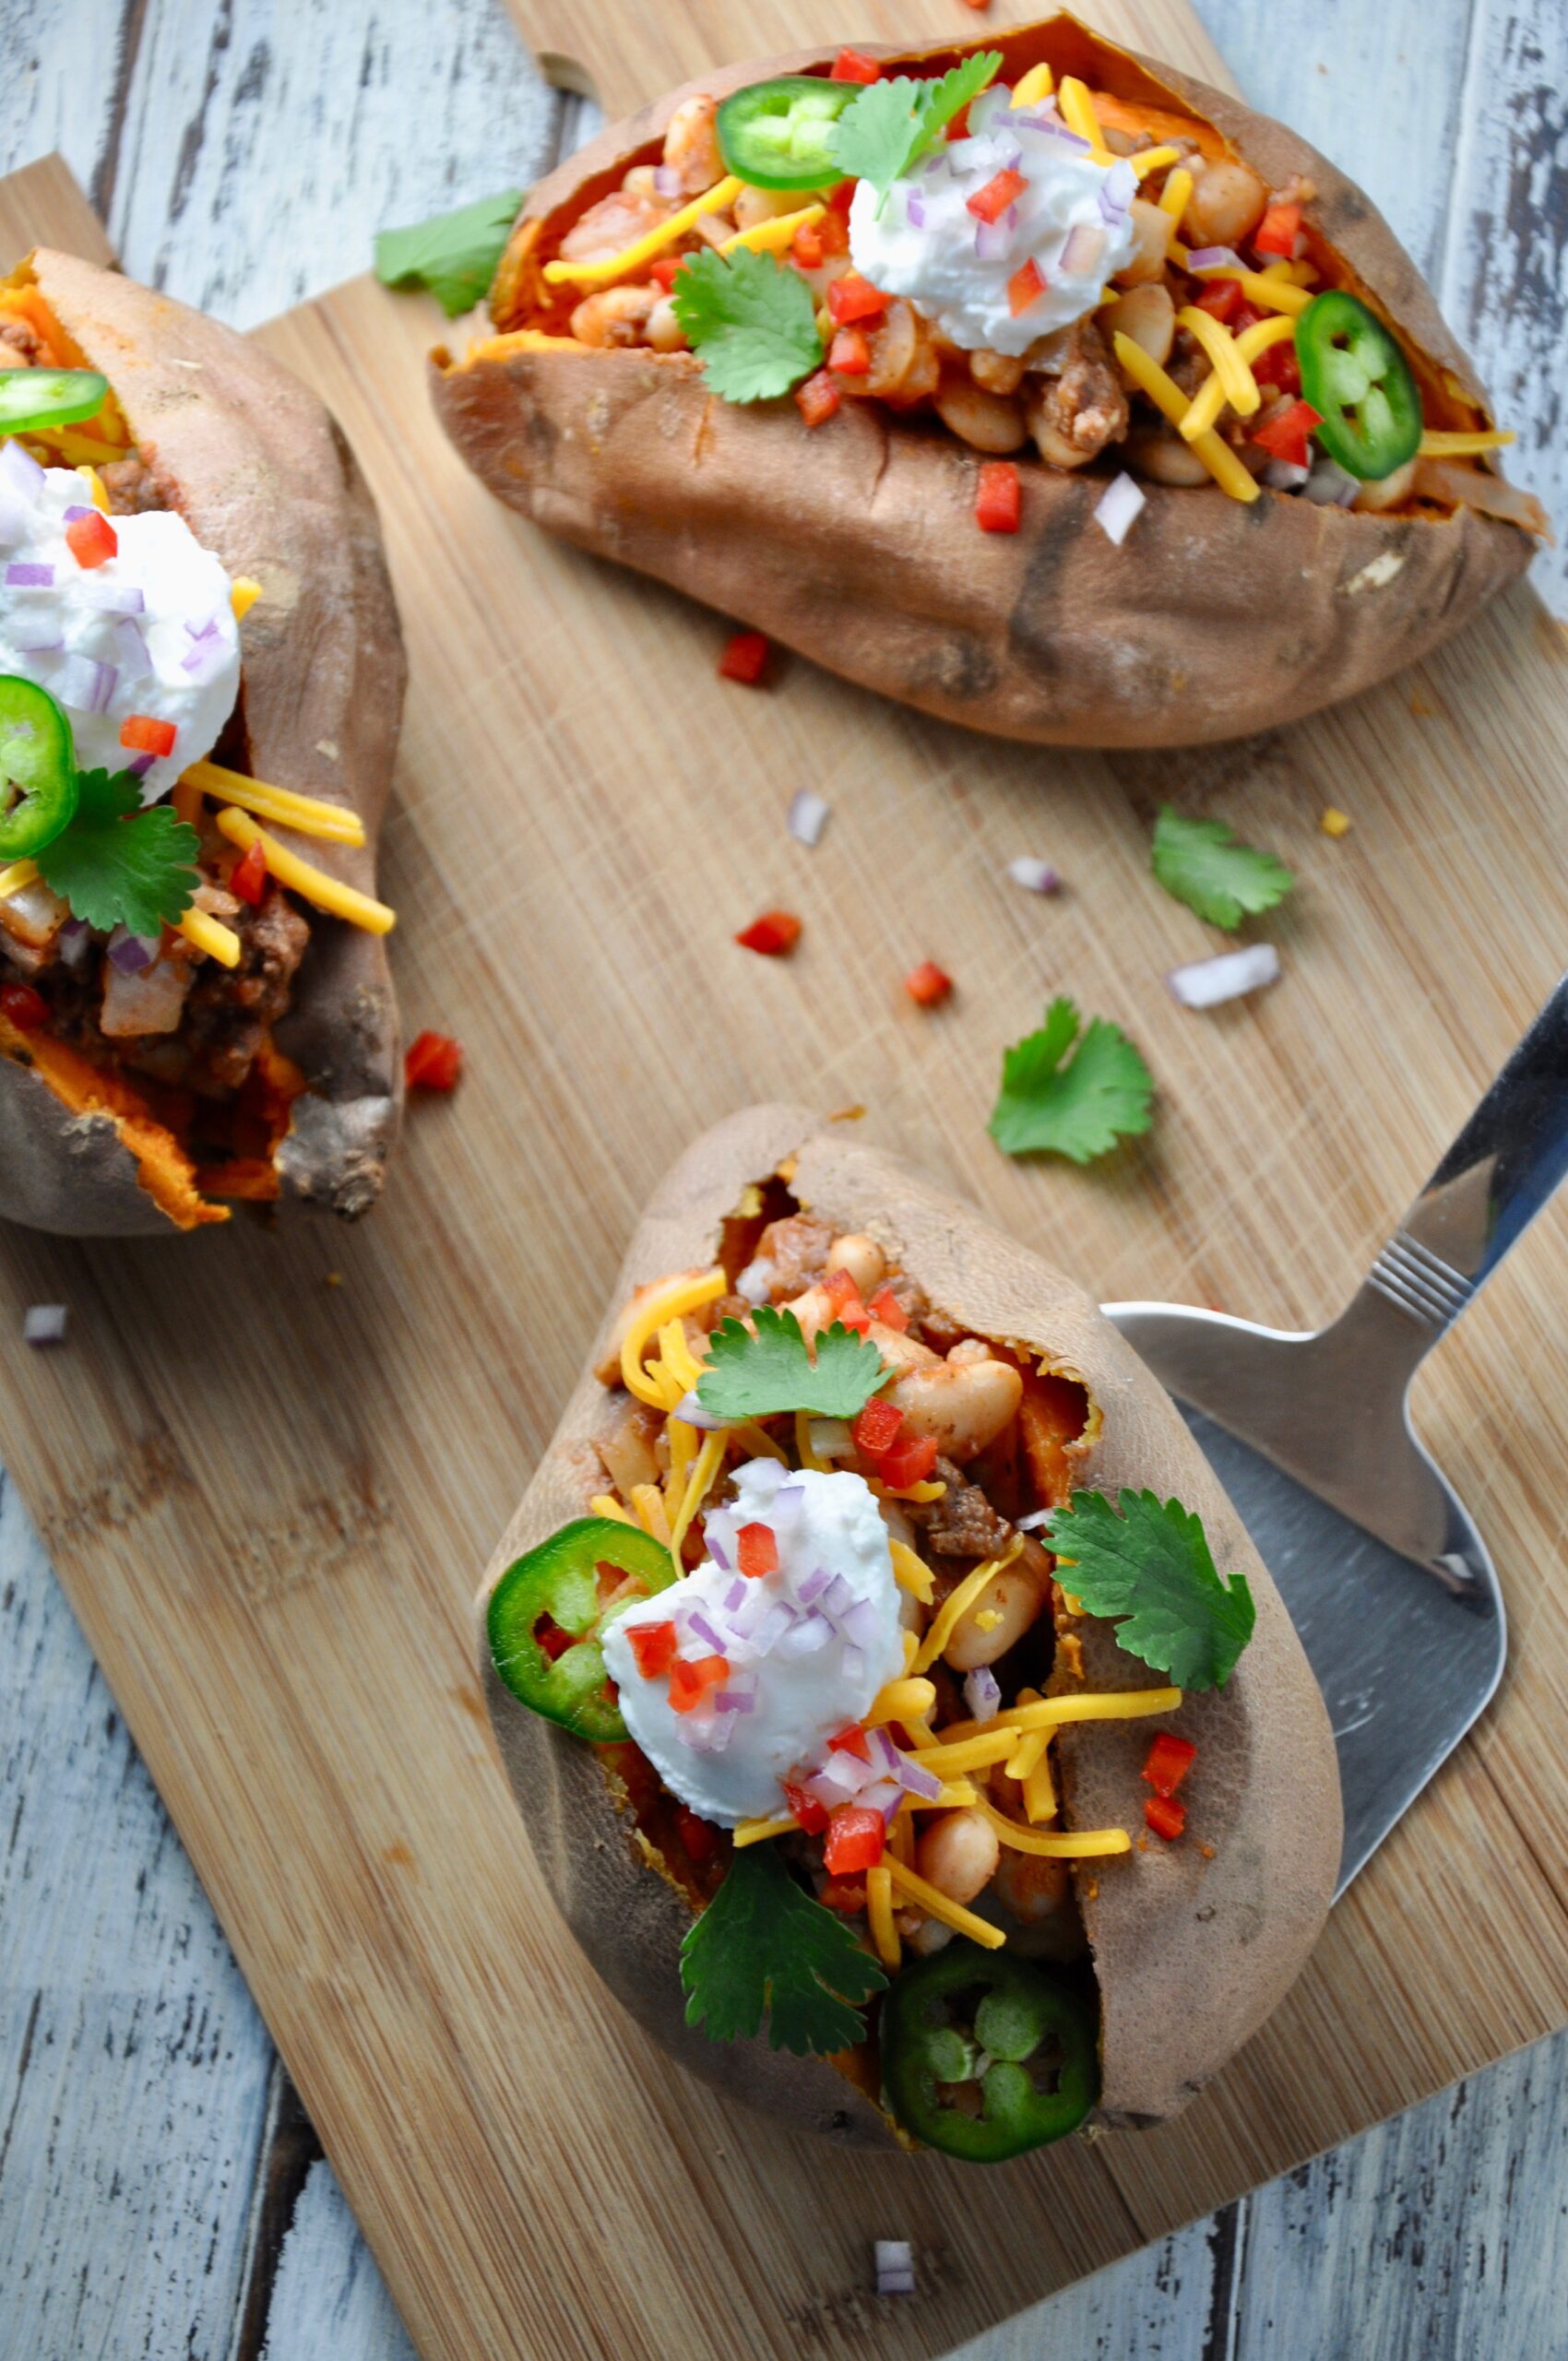 baked potatoes stuffed with chili tipped with cheese, jalapenos and sourcream on a cutting board